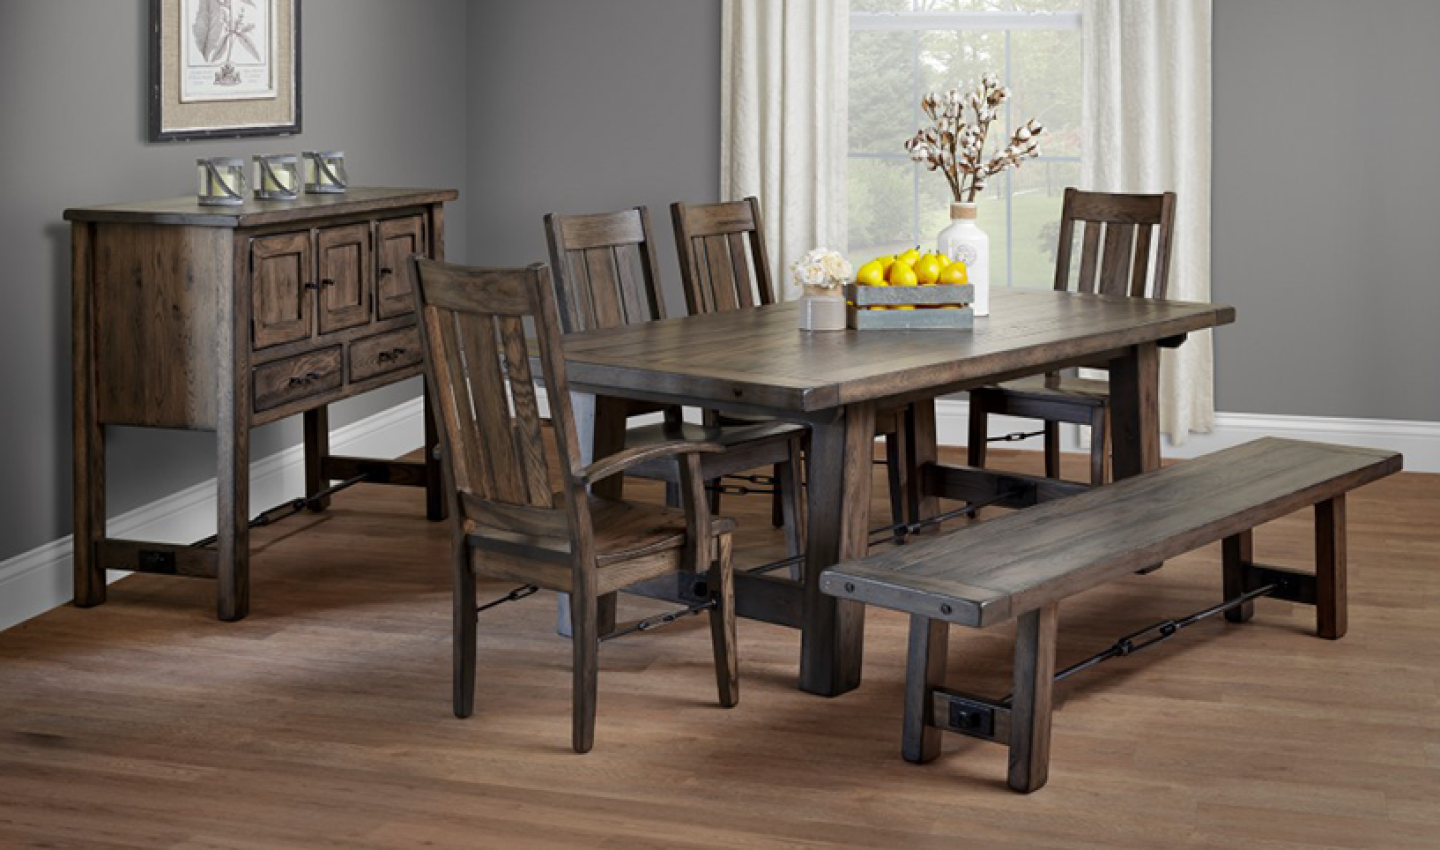 Modern Dining Table Styles & Looks